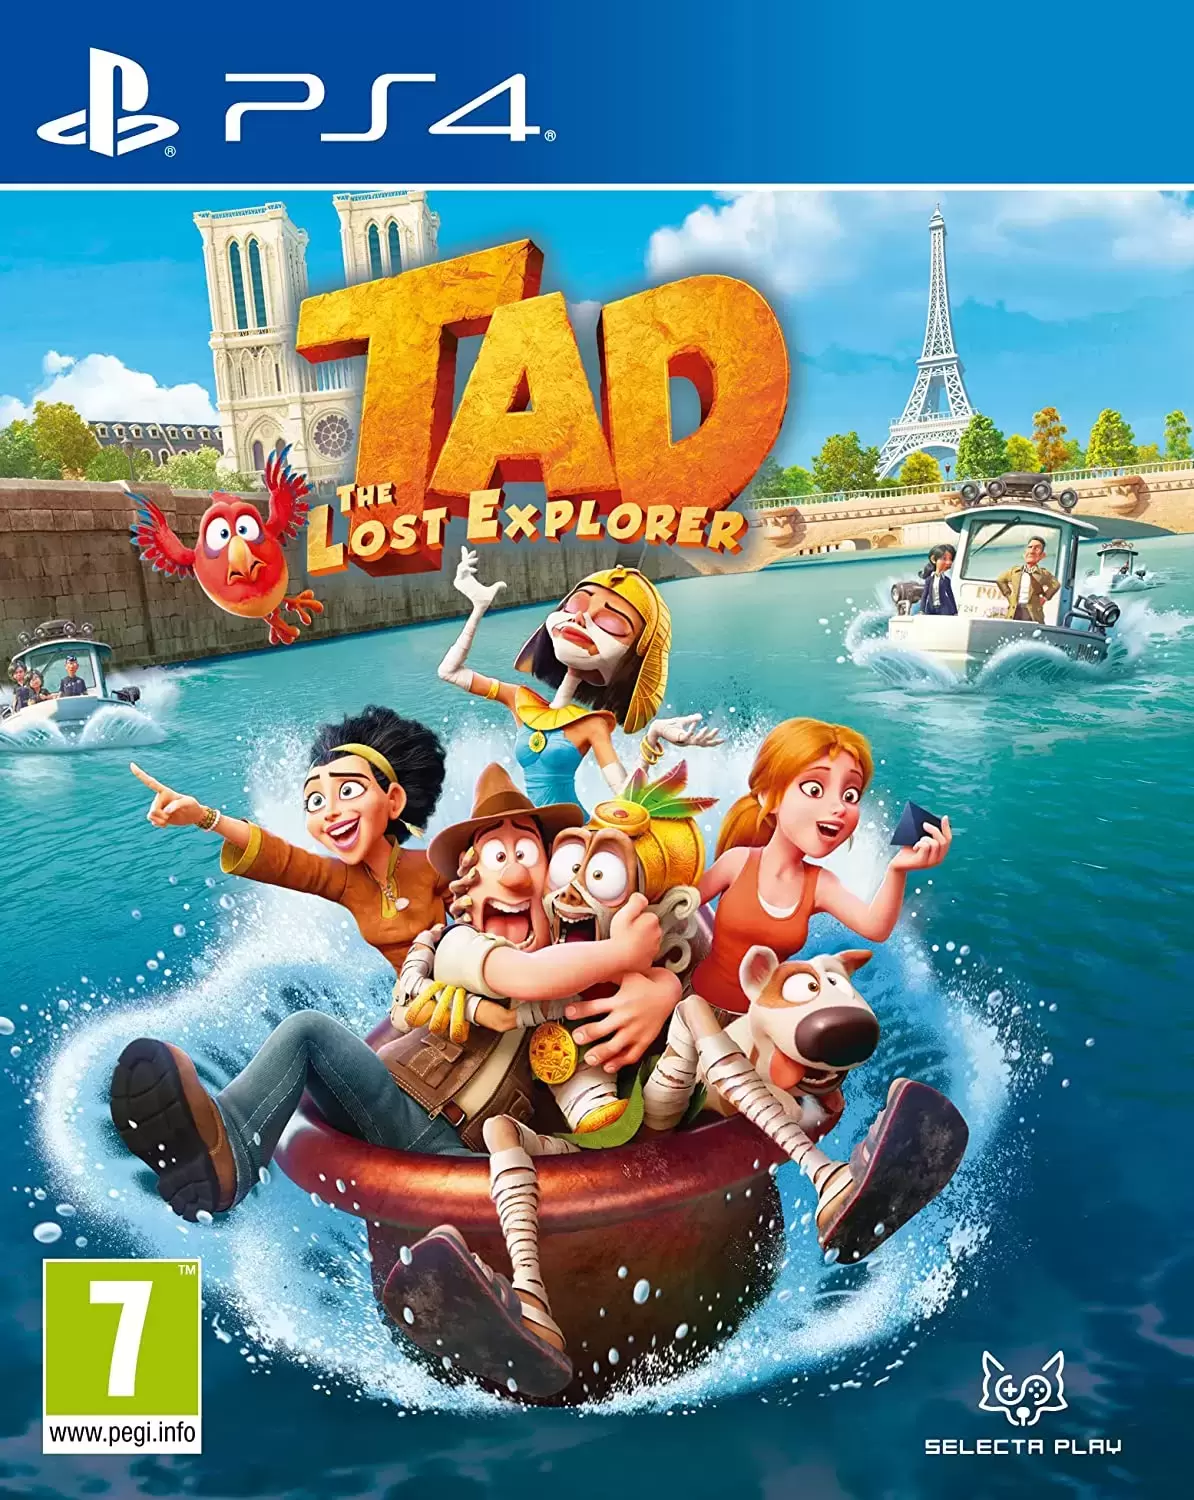 PS4 Games - Tad The Lost And The Emerald Tablet